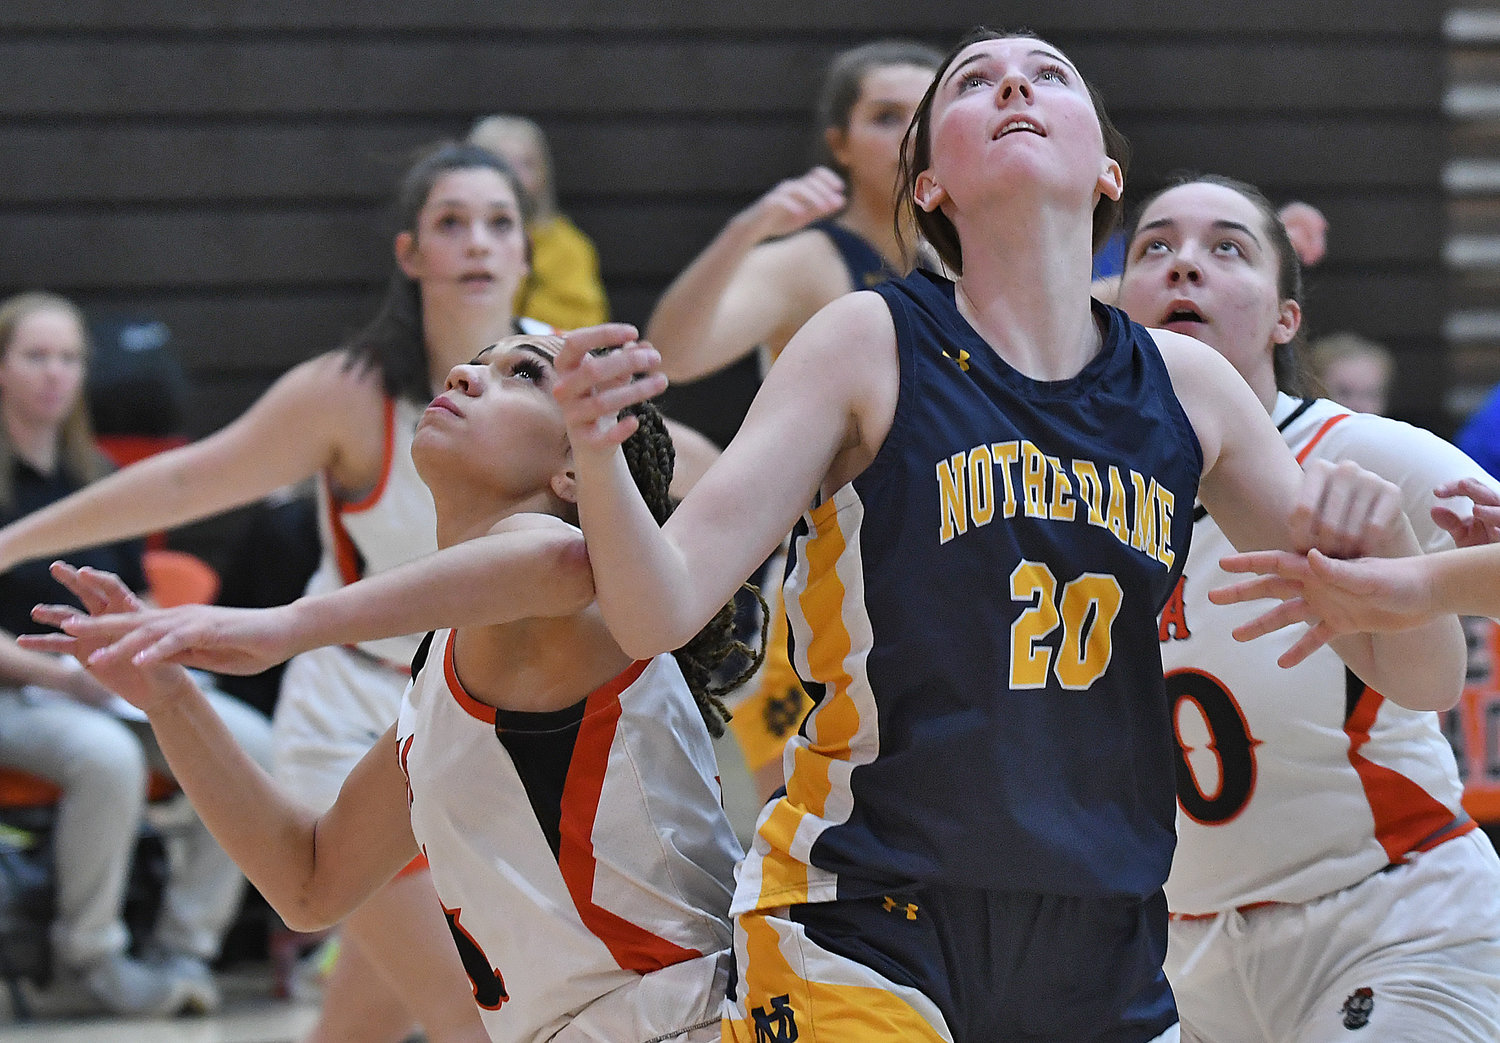 Utica-Notre Dame's Ella Trinkaus awaits a possible rebound while flanked by Rome Free Academy's Alysa Jackson, left, and Raelyn Dole.